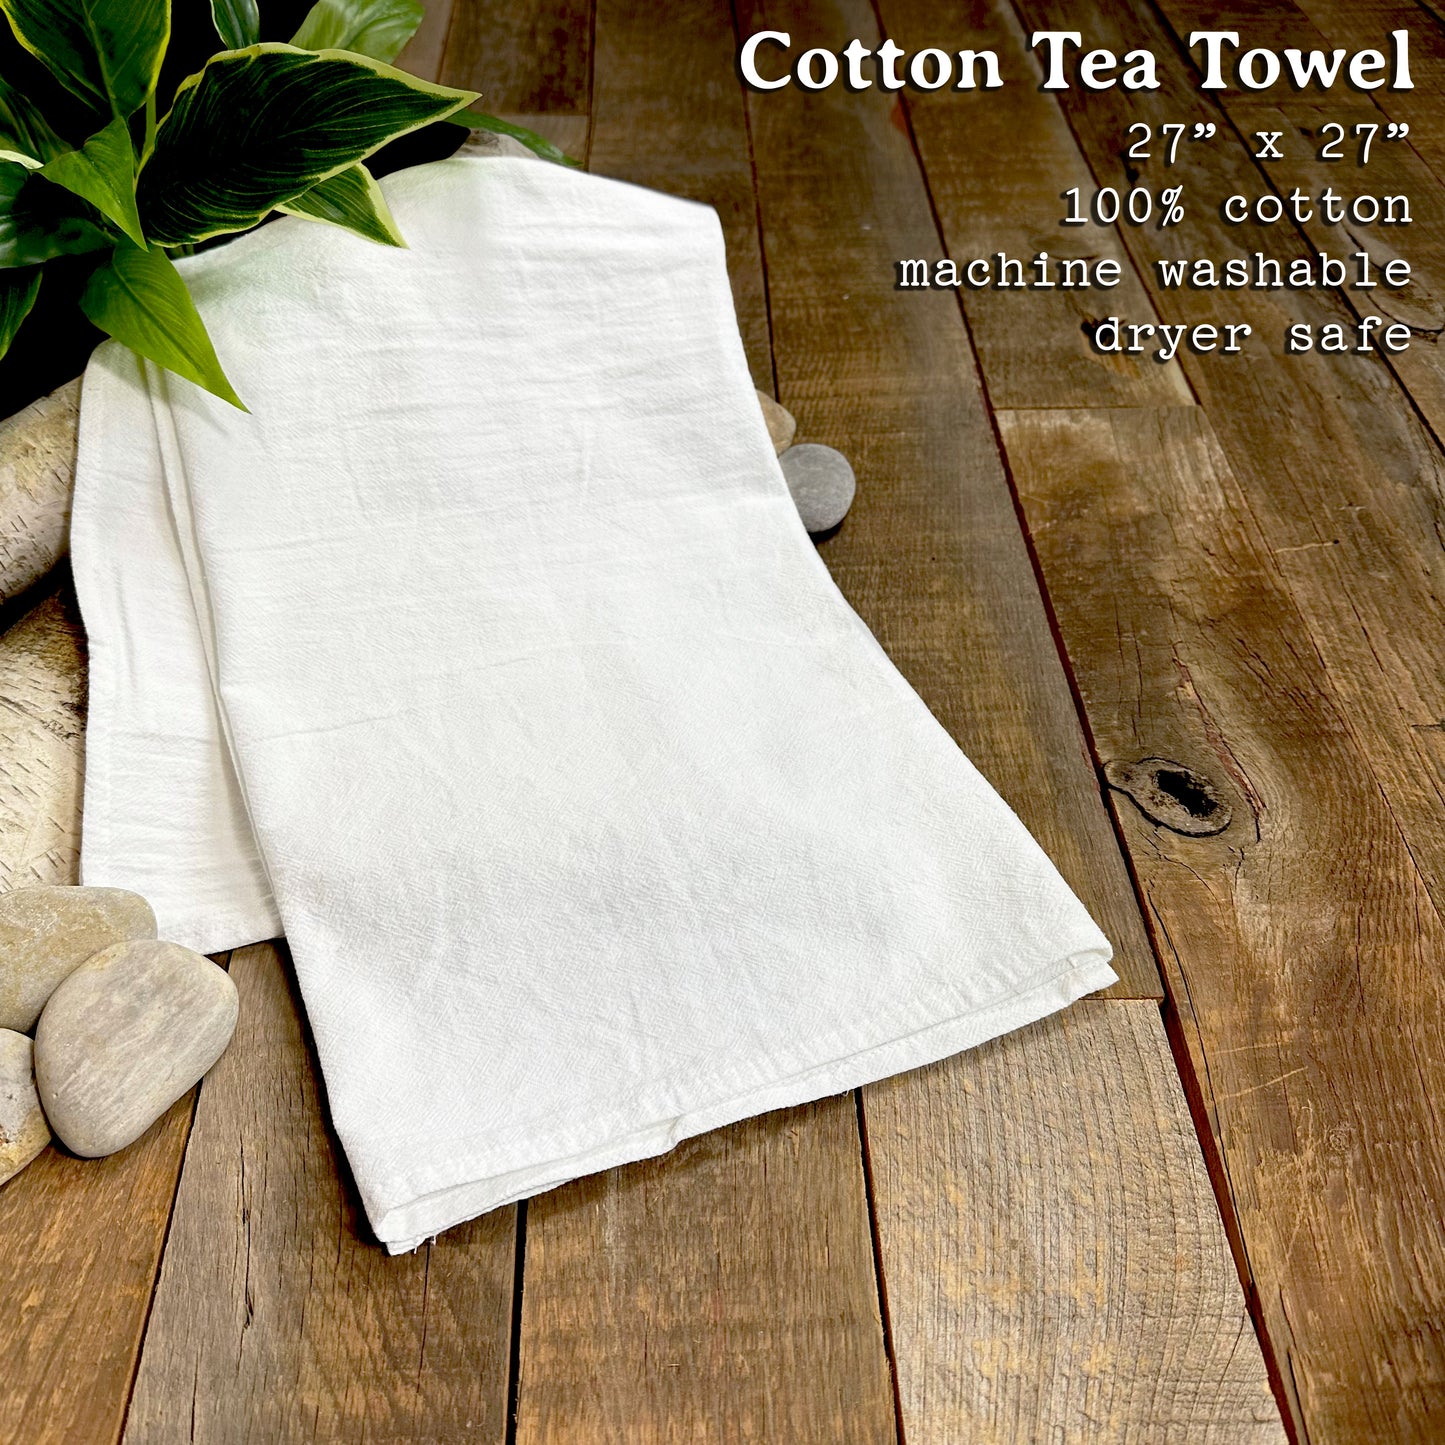 The Cabin is My Happy Place - Cotton Tea Towel